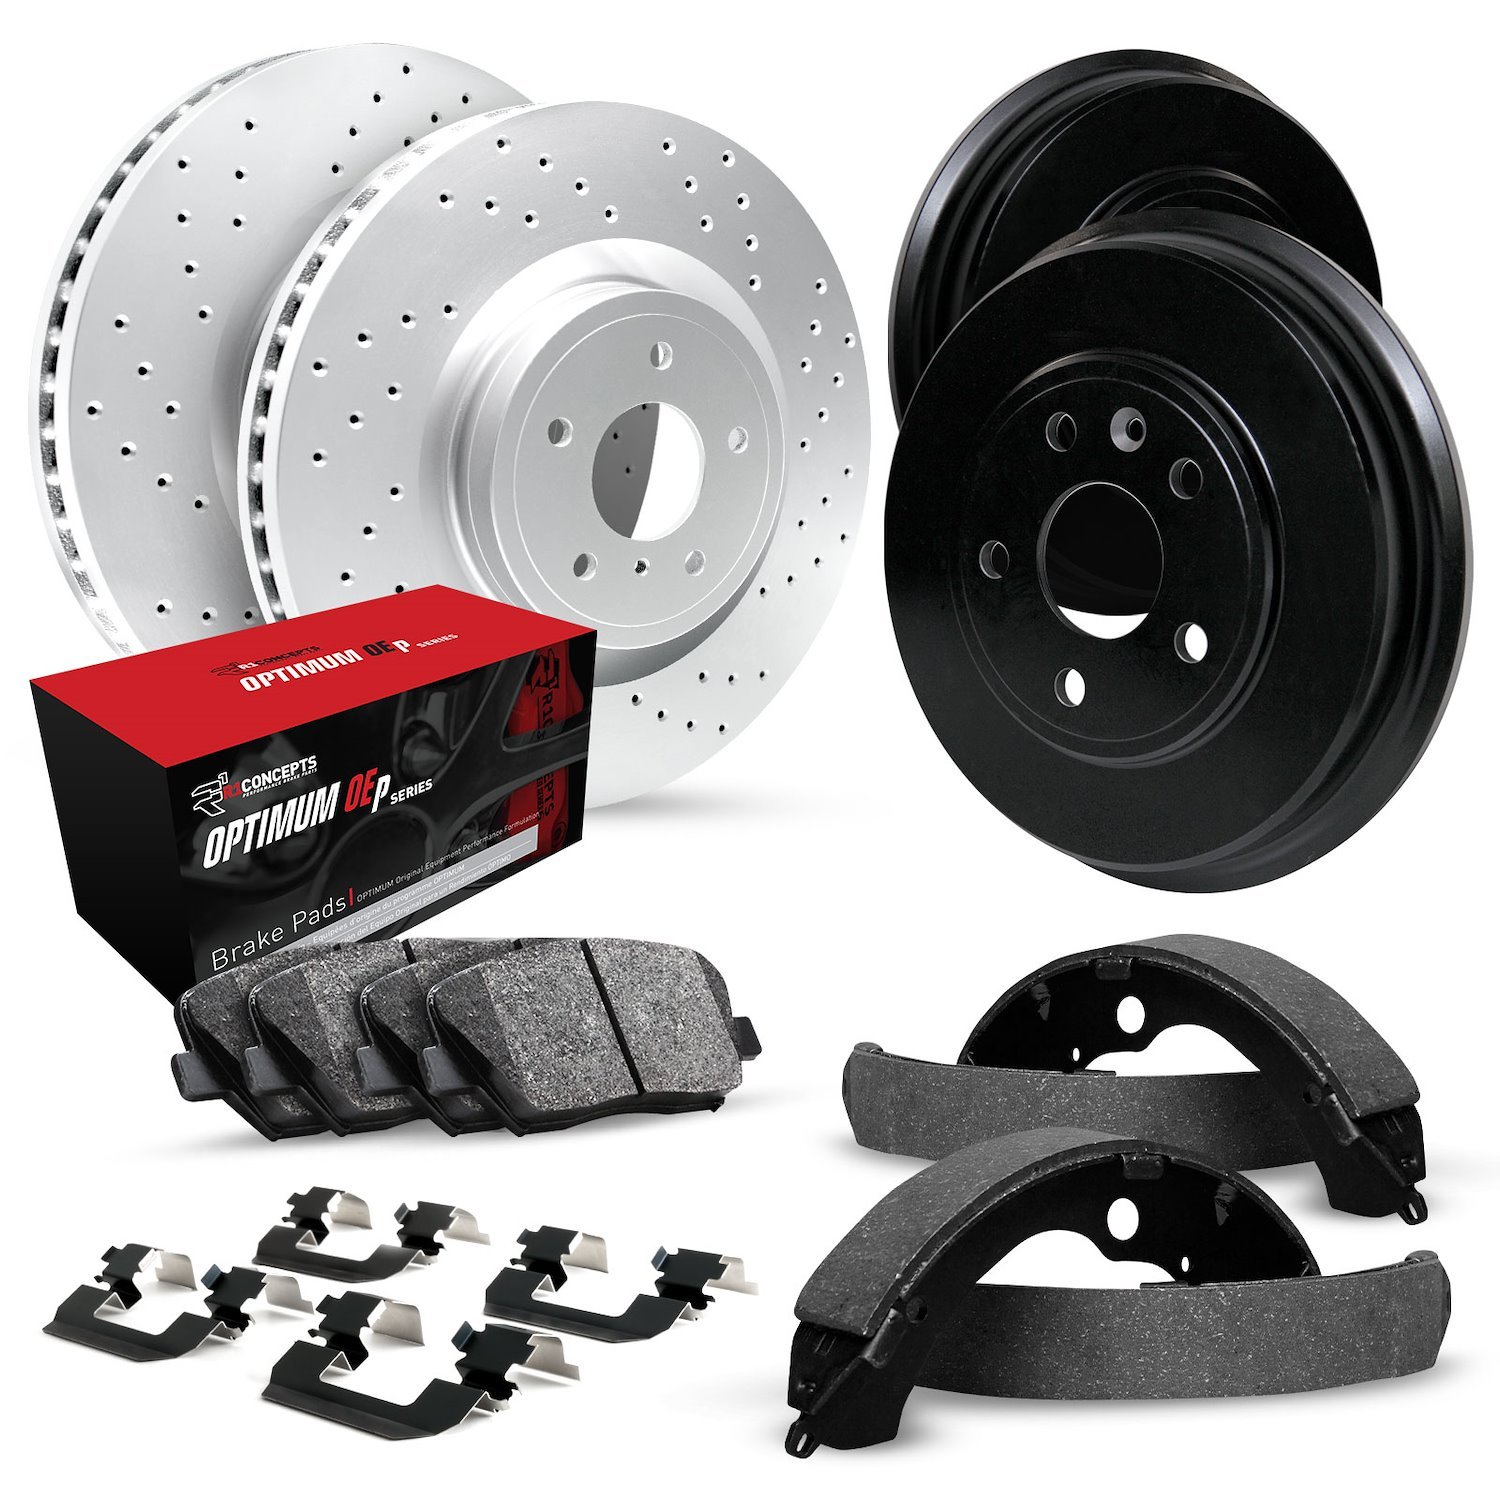 GEO-Carbon Drilled Brake Rotor & Drum Set w/Optimum OE Pads, Shoes, & Hardware, 1991-1998 GM, Position: Front & Rear